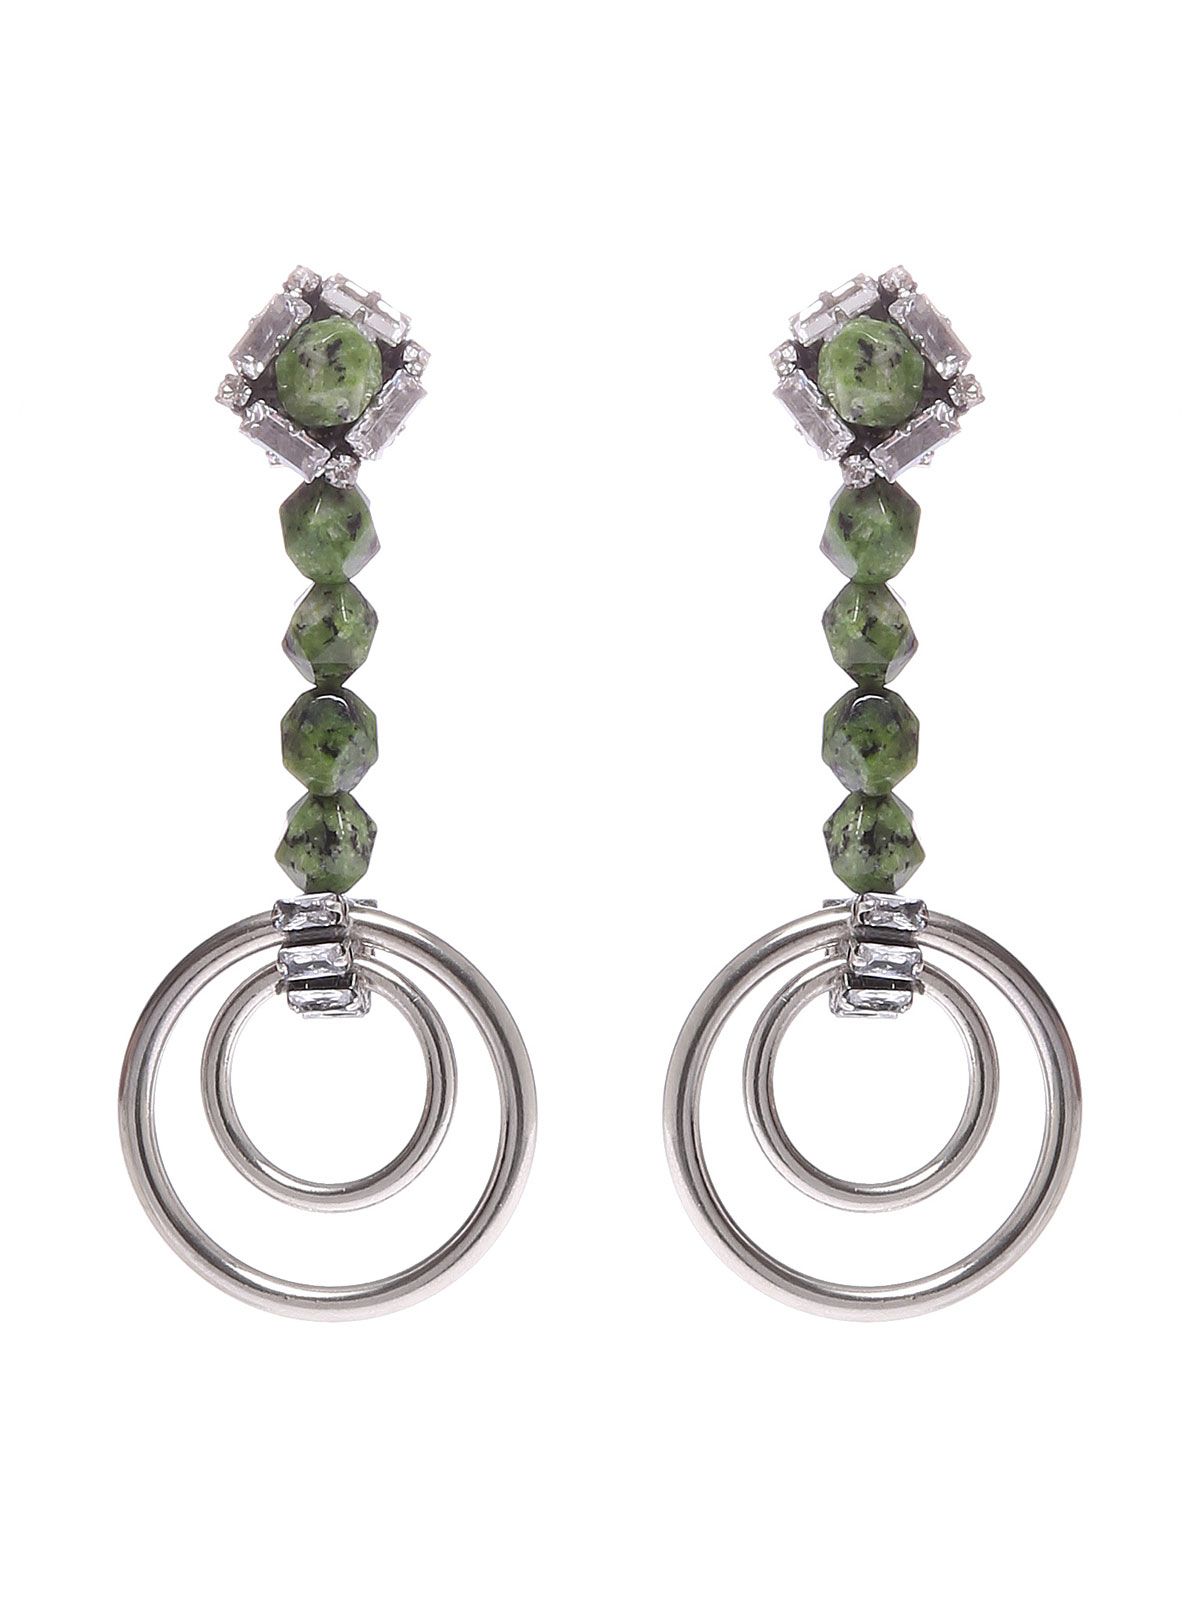 Labradorite stone earrings with antique silver hoops